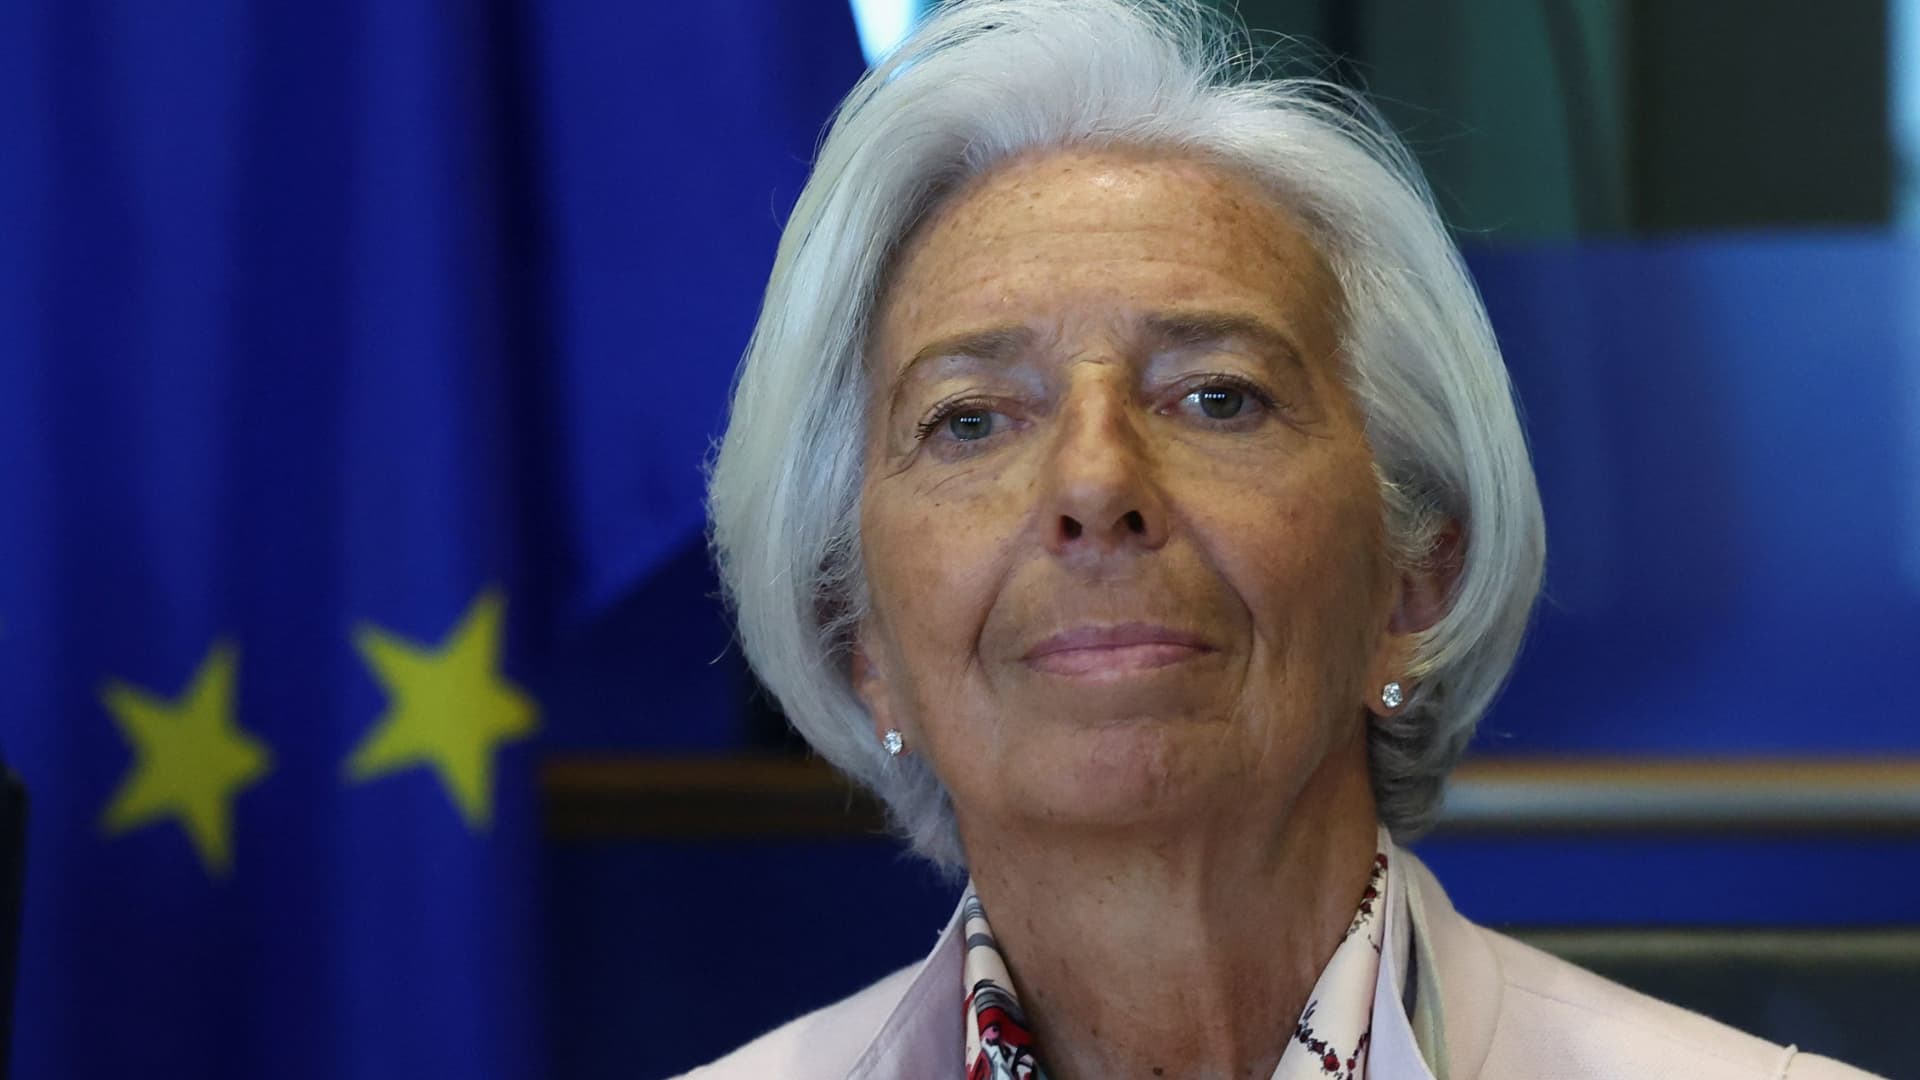 Lagarde says she's proud to lead ECB after scathing staff survey